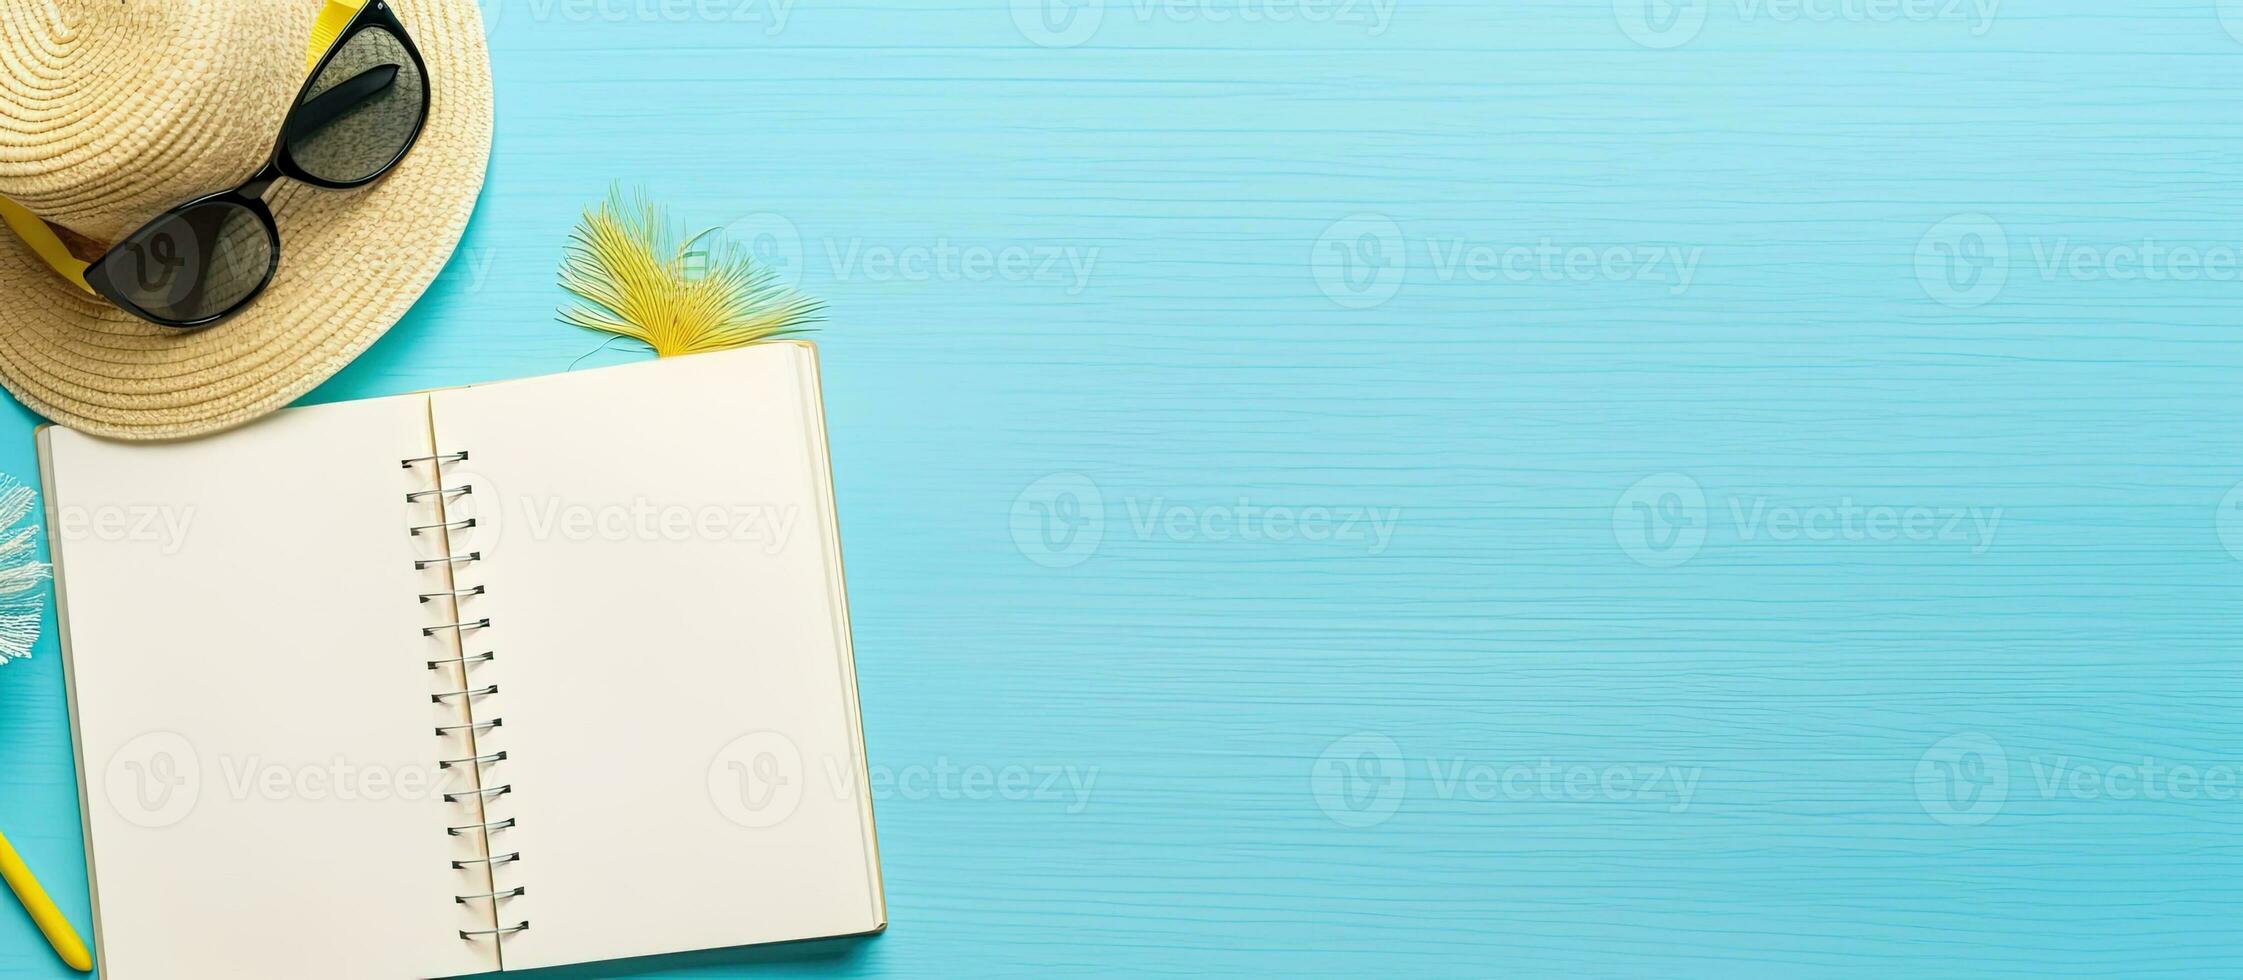 A writing book with summer beach accessories is shown on a background with copy space, offering photo